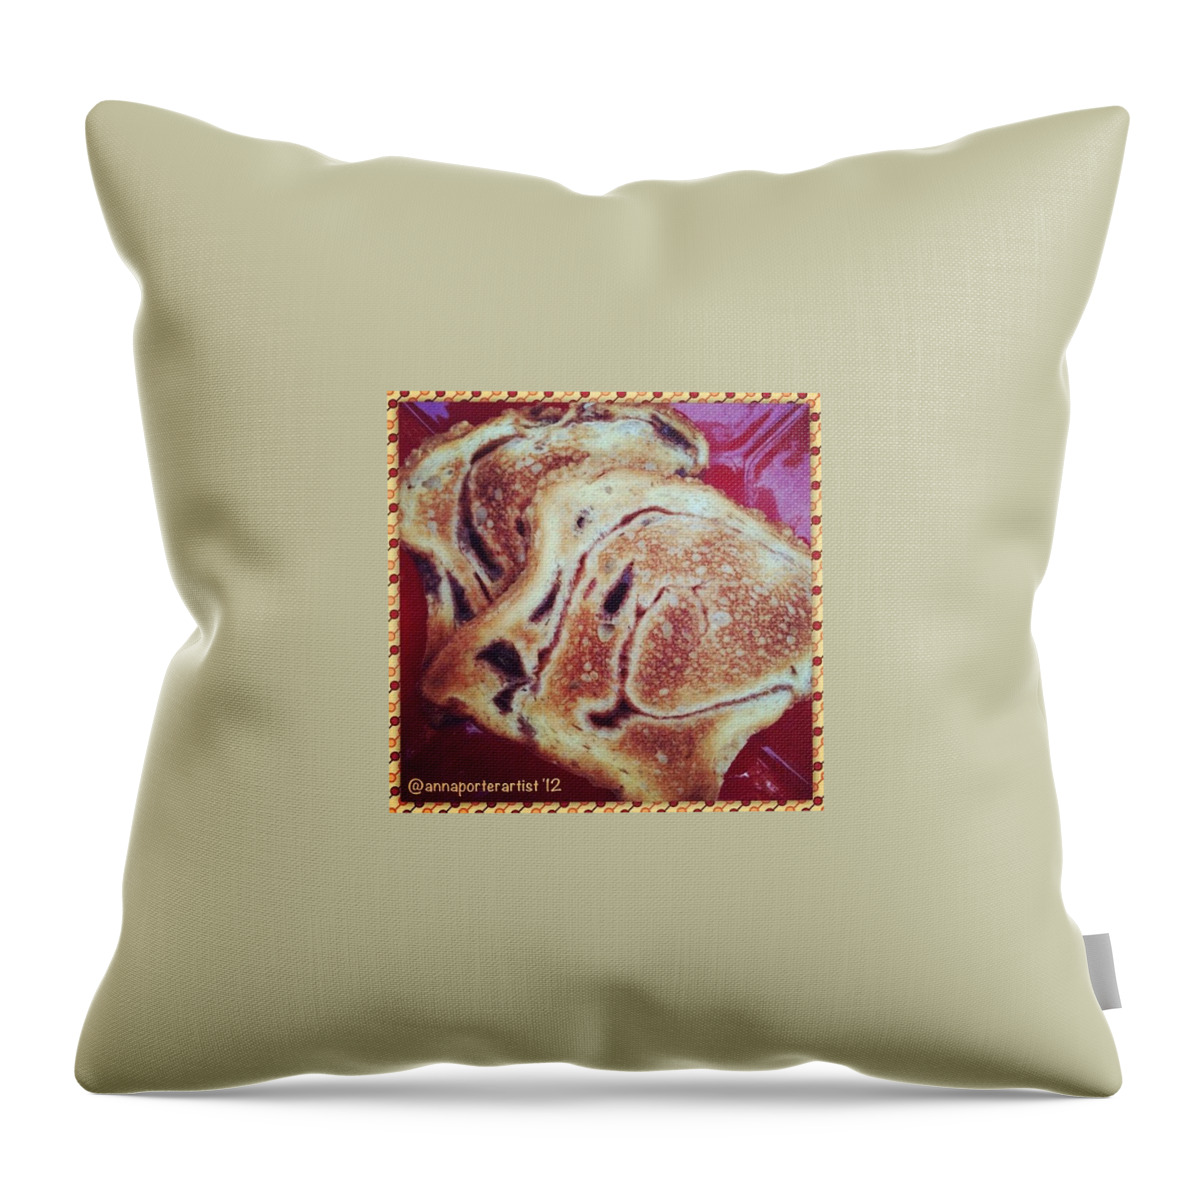 4foodies Throw Pillow featuring the photograph My Favorite #fmsphotoaday #day23 by Anna Porter